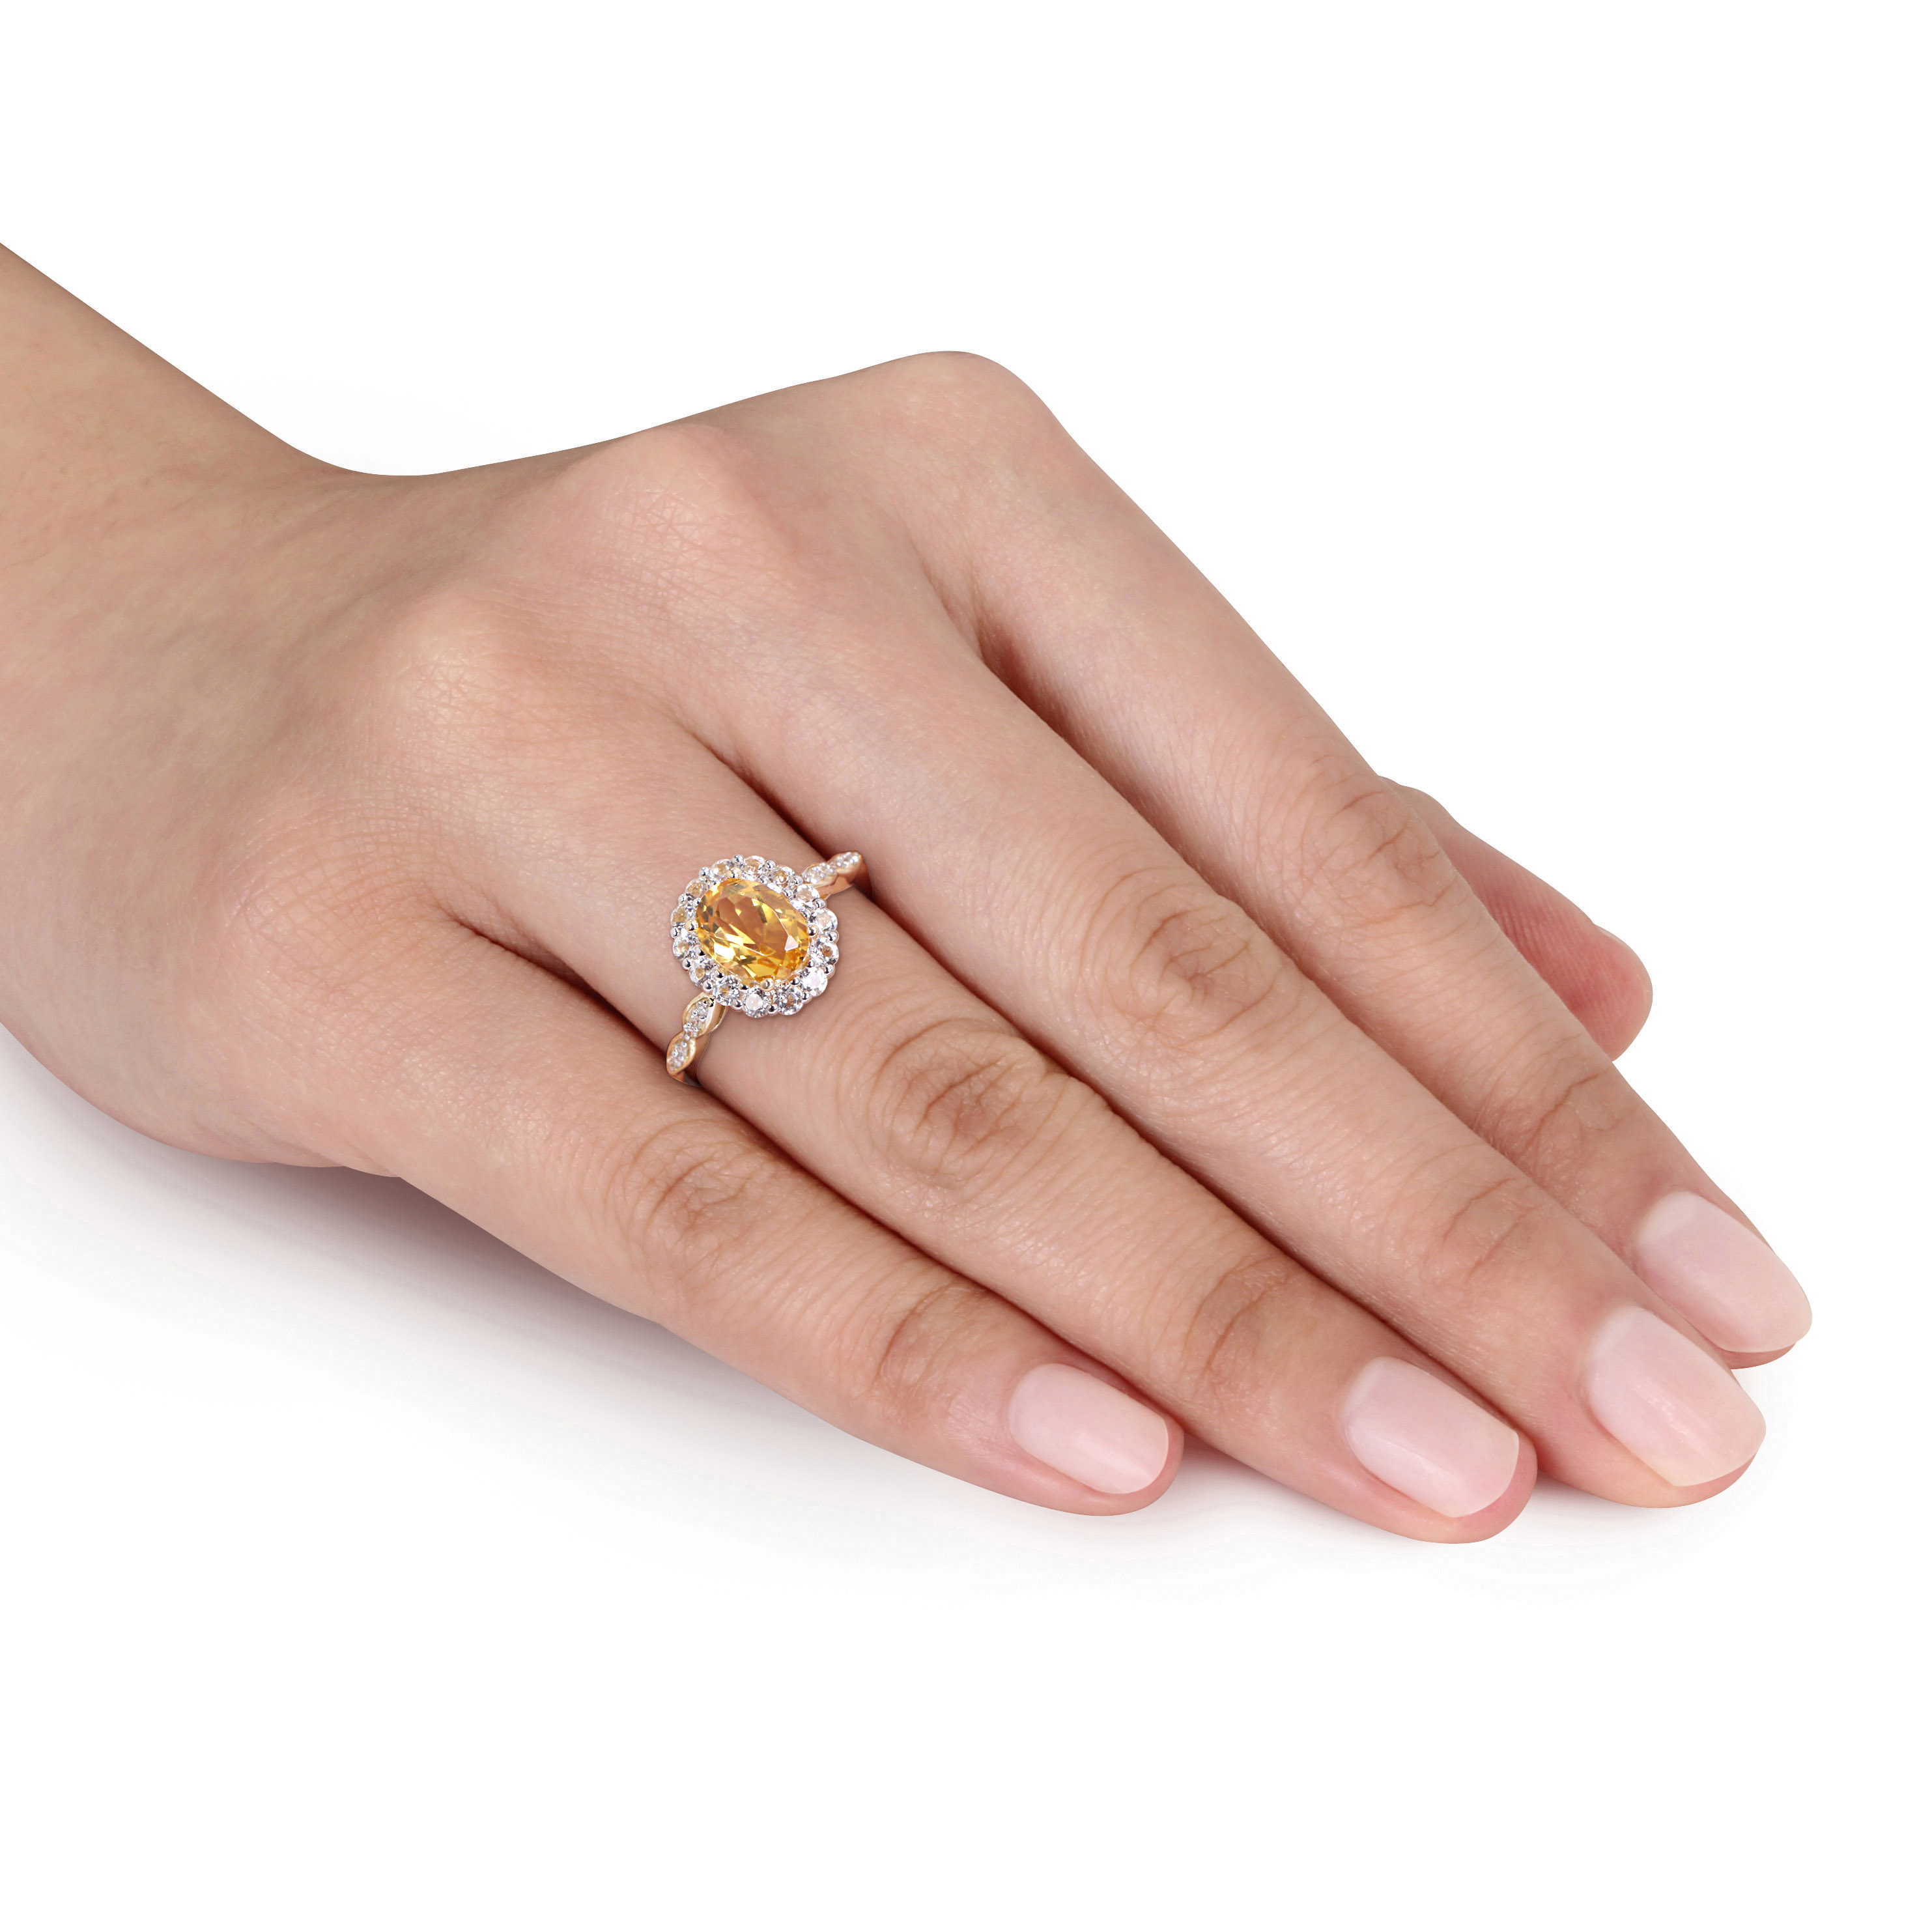 Oval Shape Citrine, White Topaz and Diamond Accent Vintage Ring in 14k Yellow Gold